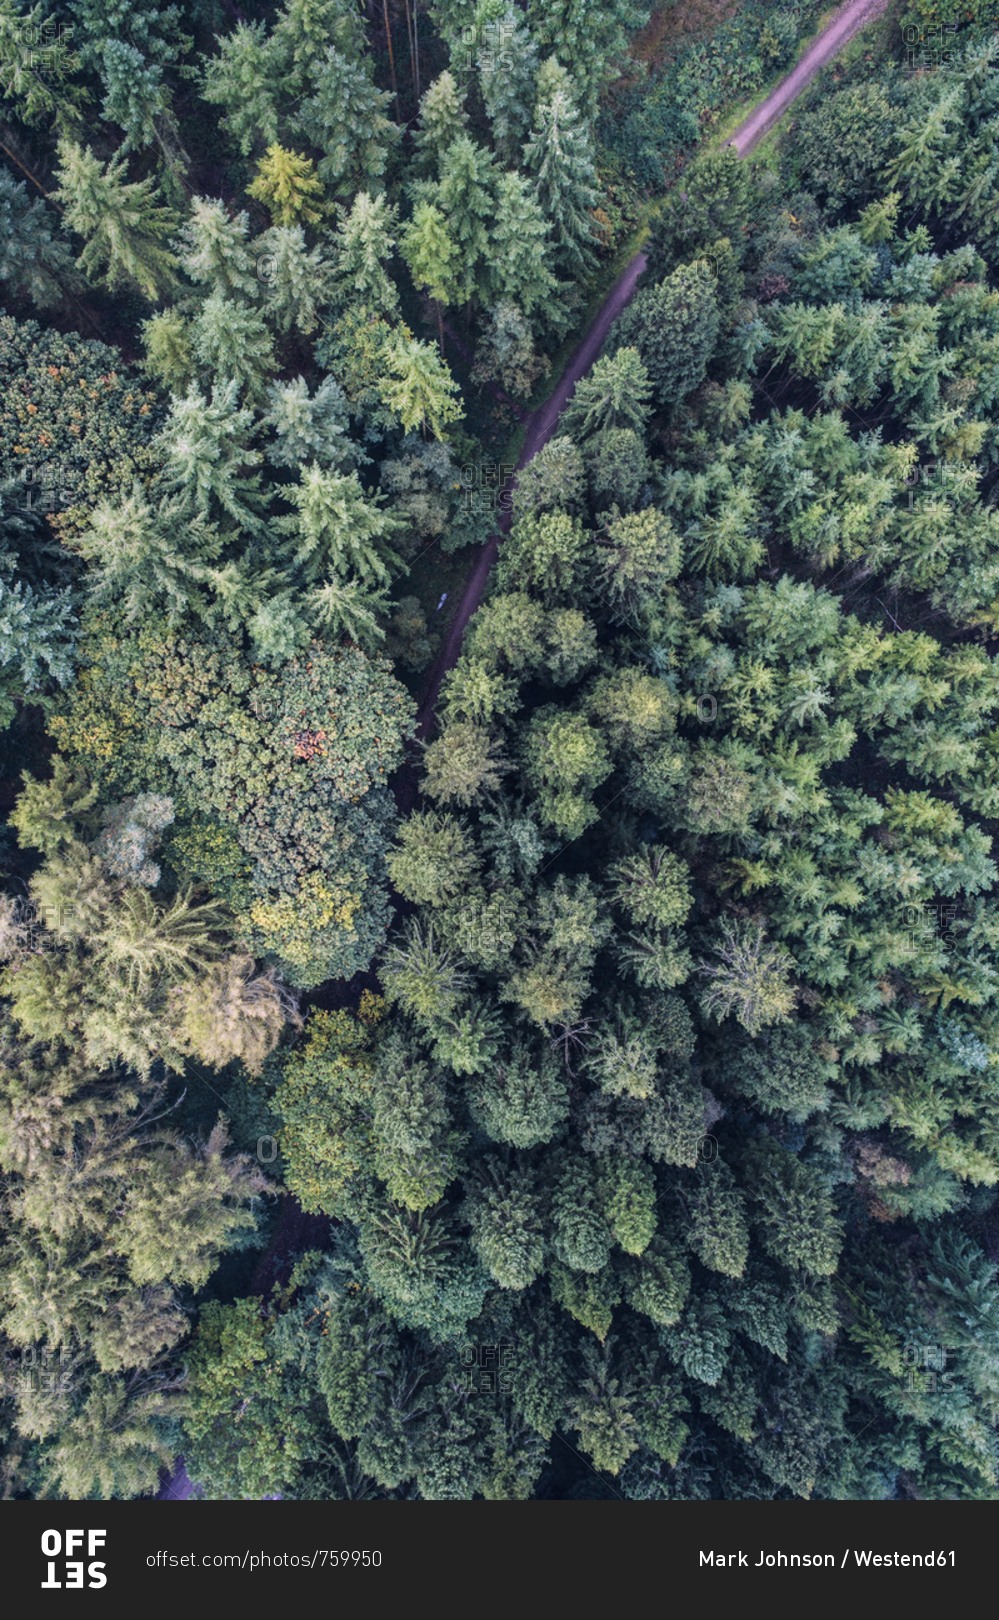 UK- Wales- pine forest seen from above